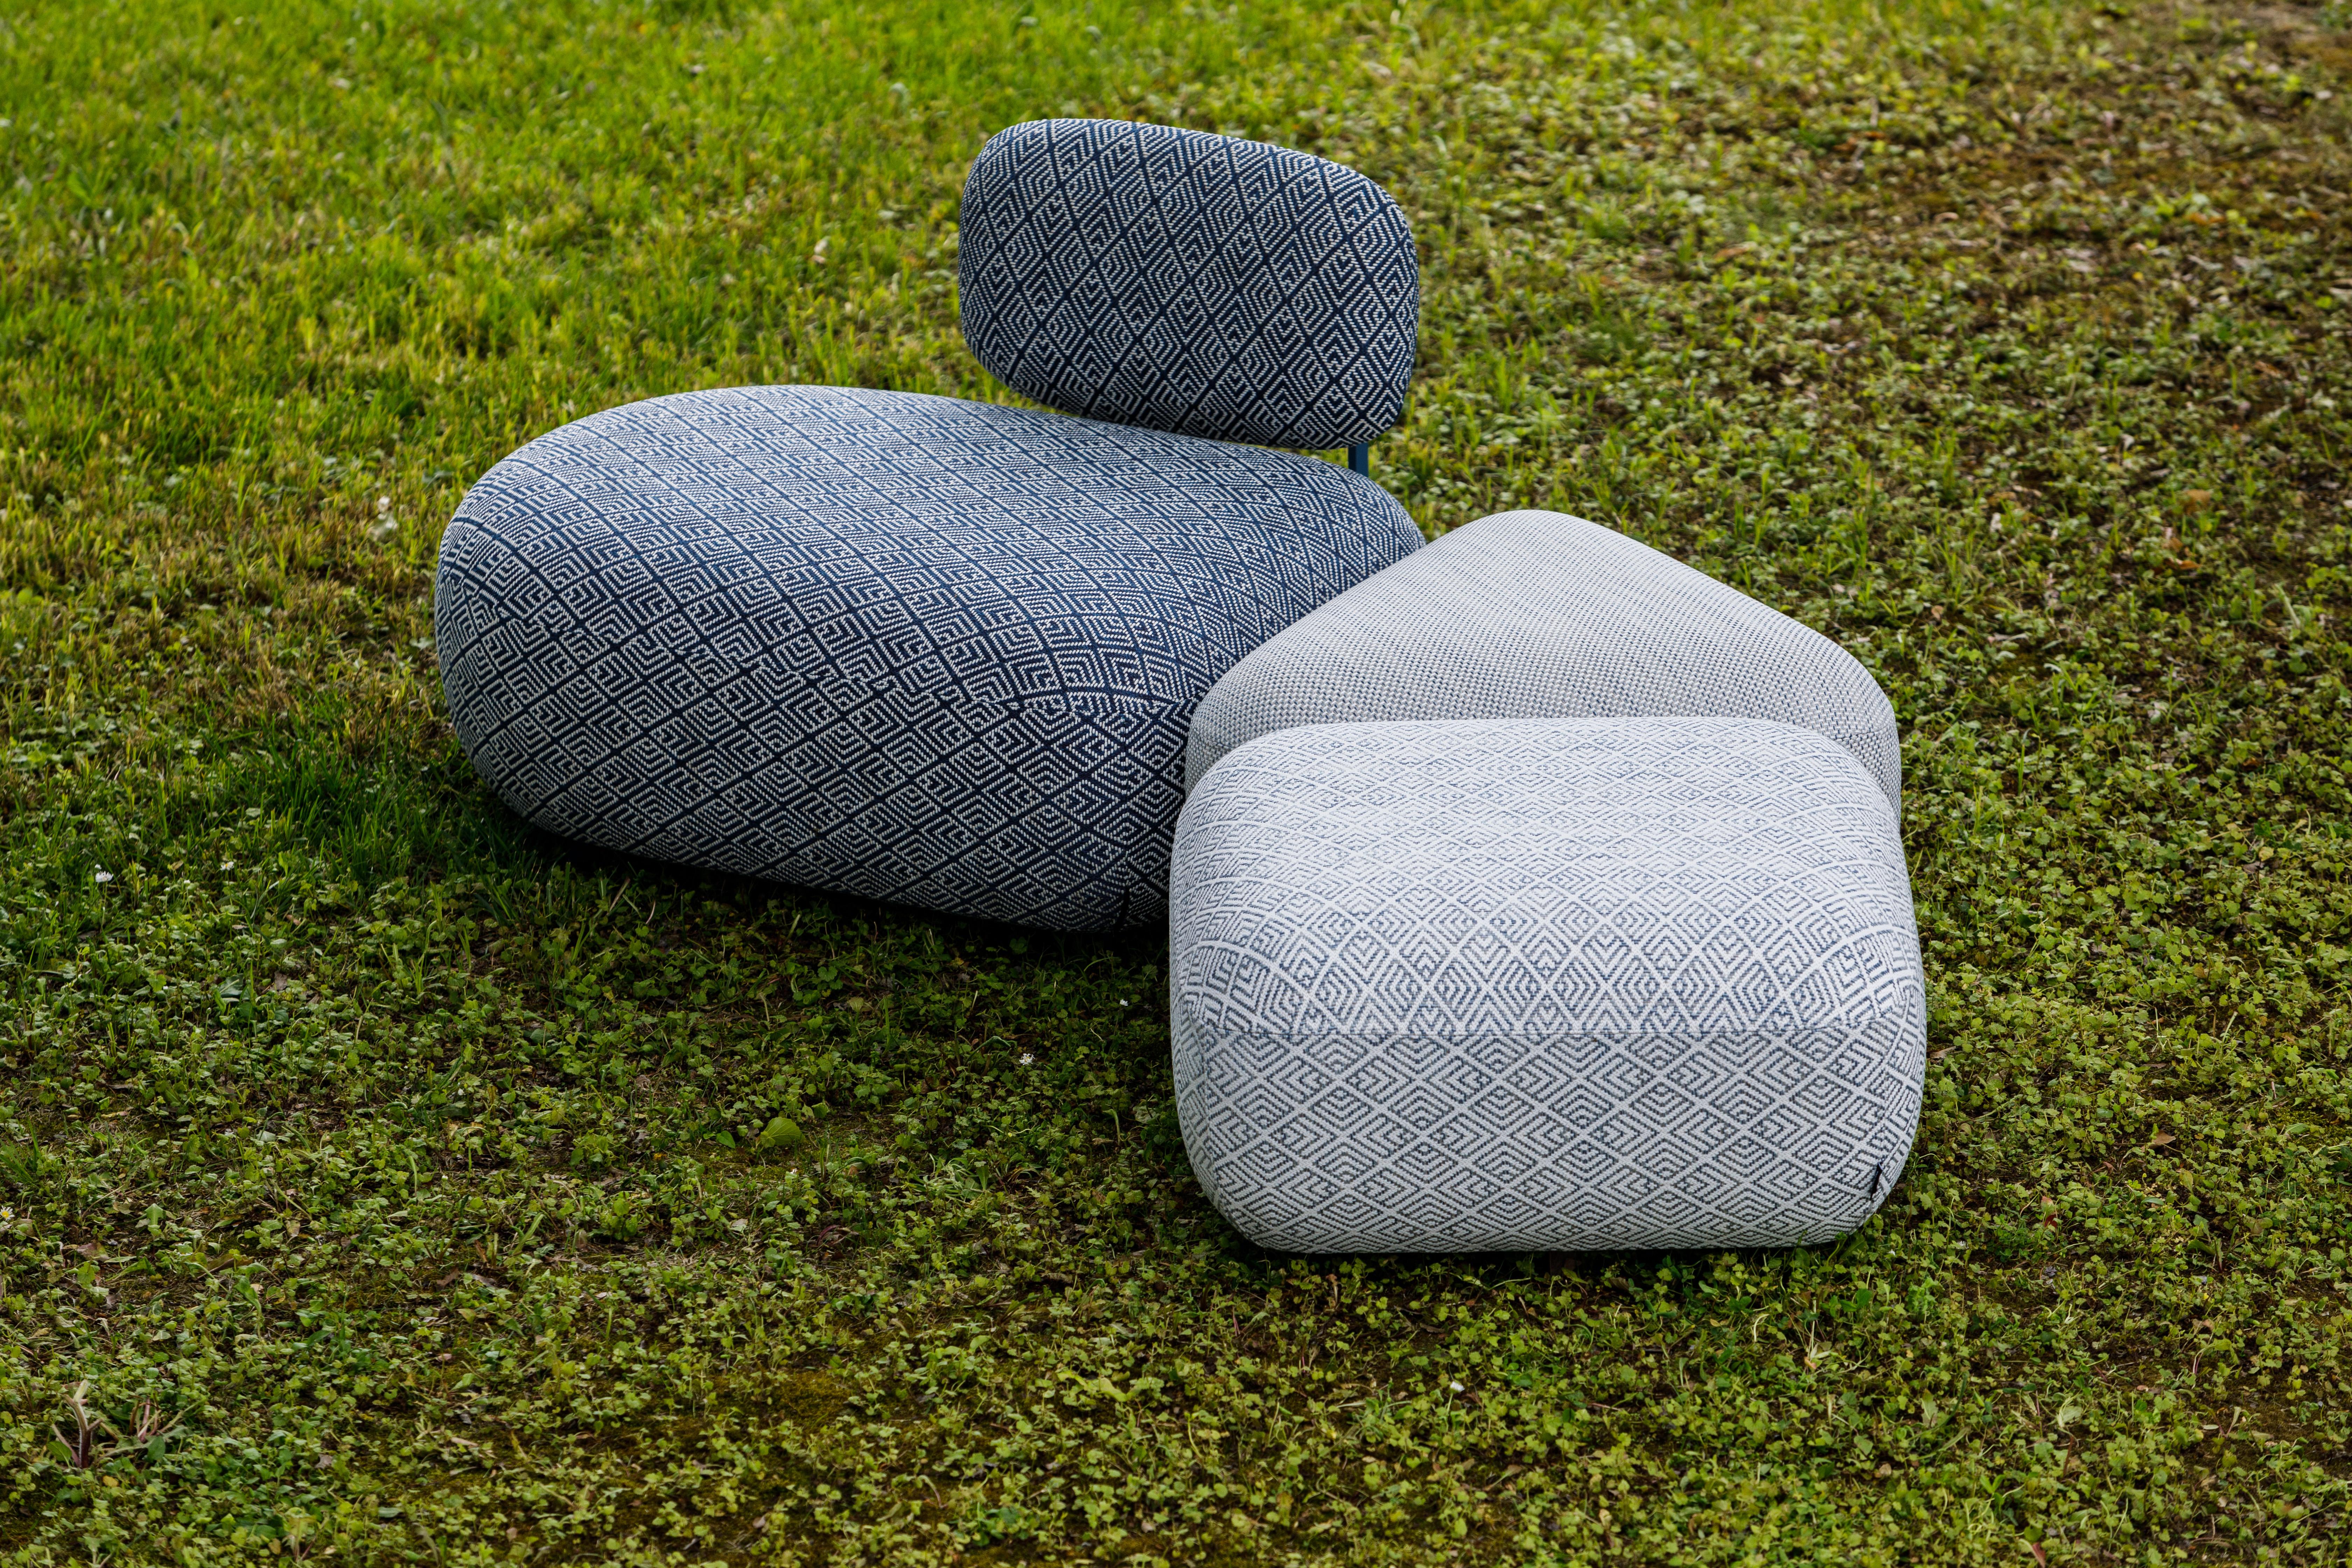 Contemporary 21st Century Modern Big Square Pouf for Outdoor Code Made in Italy For Sale